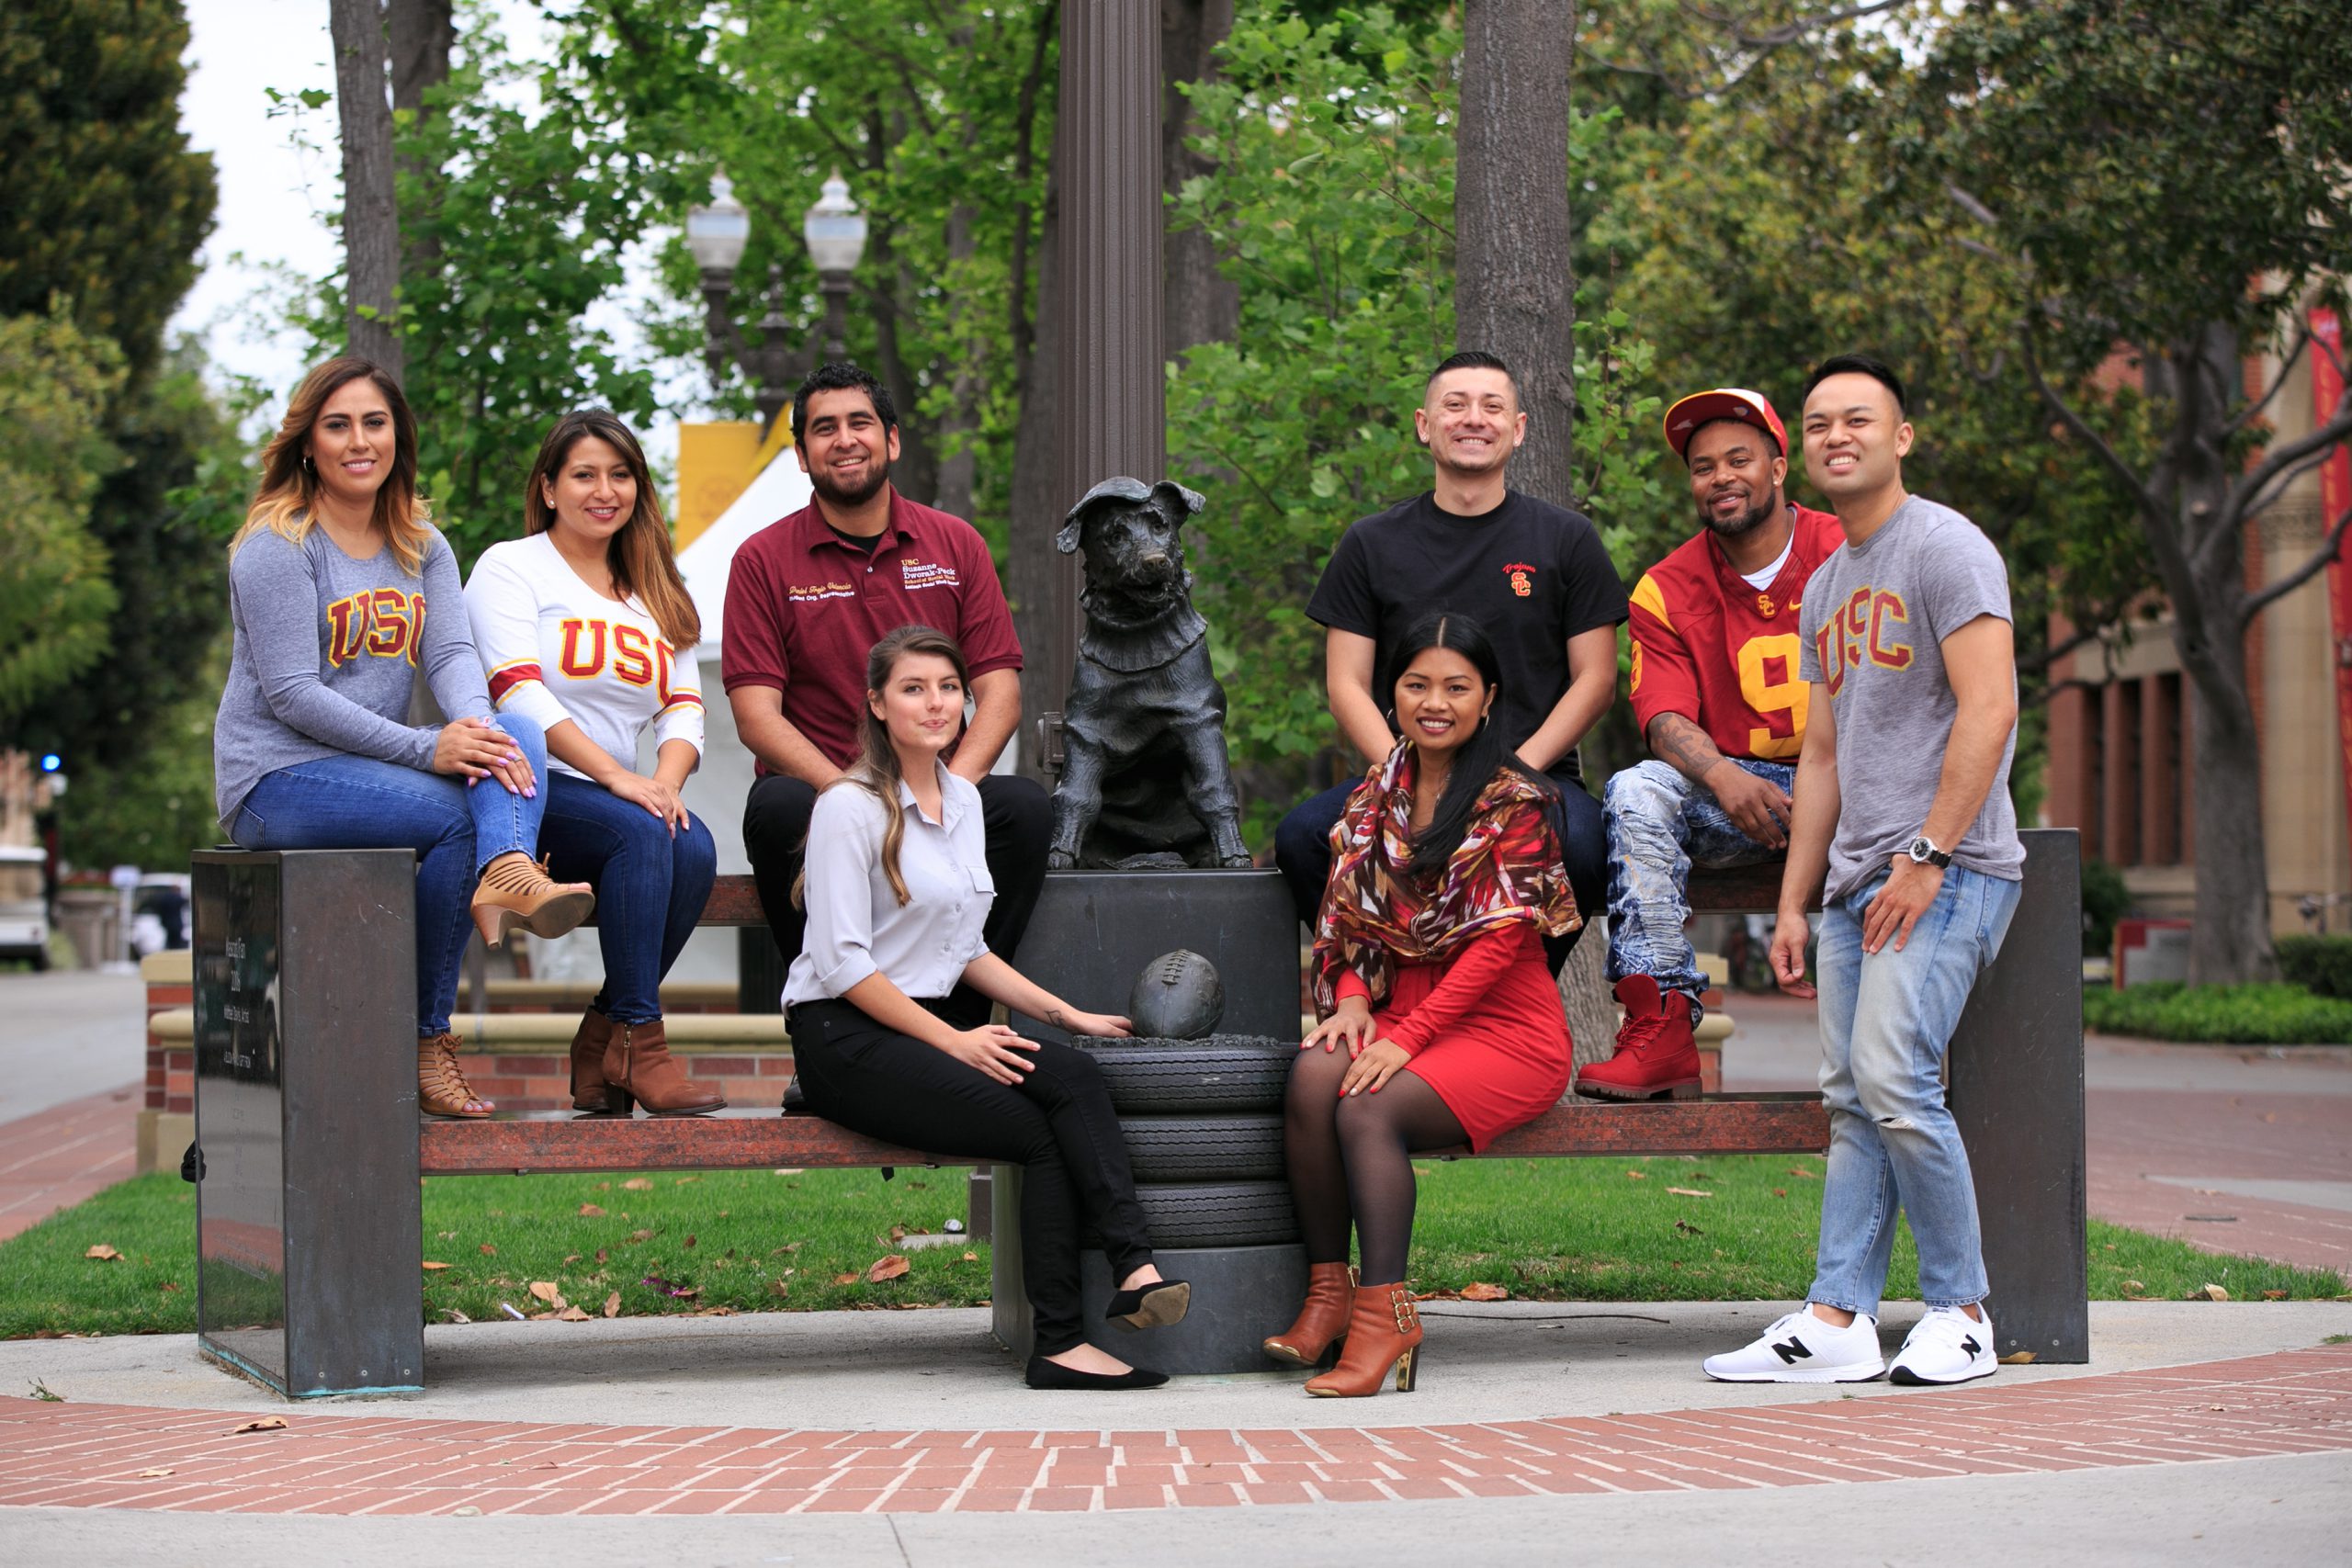 Students from the USC Master Social Work program pose on campus.